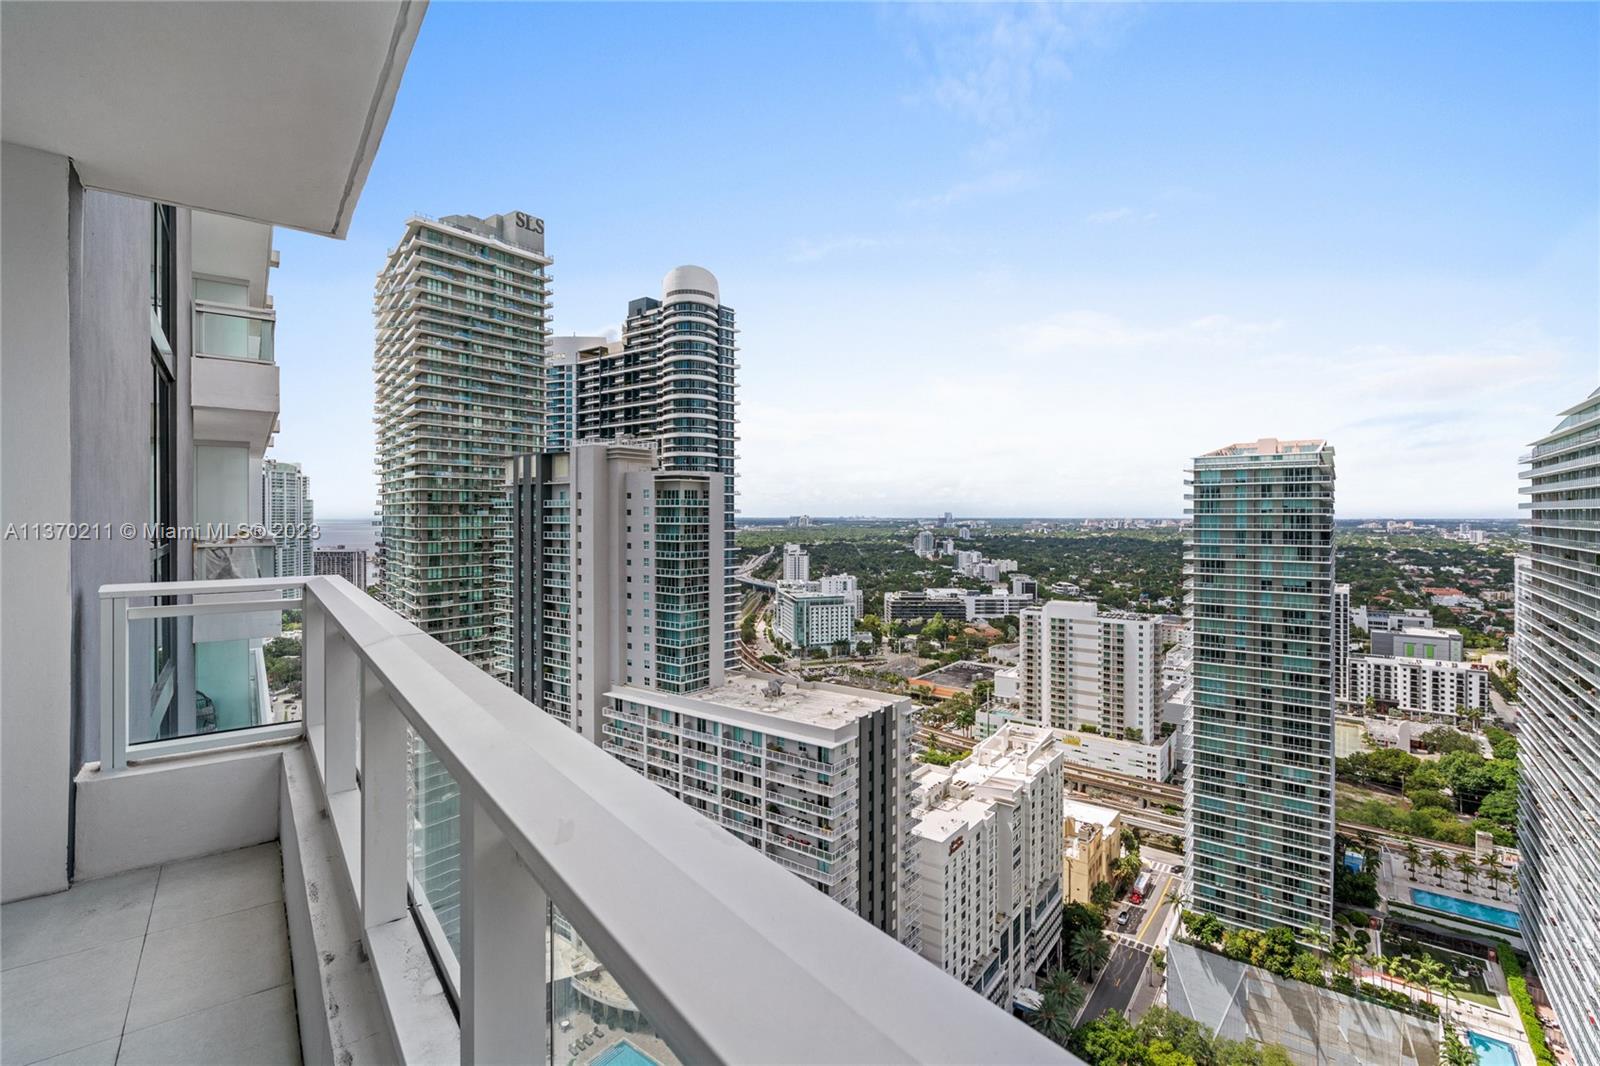 1080  Brickell Ave #1507 For Sale A11370211, FL